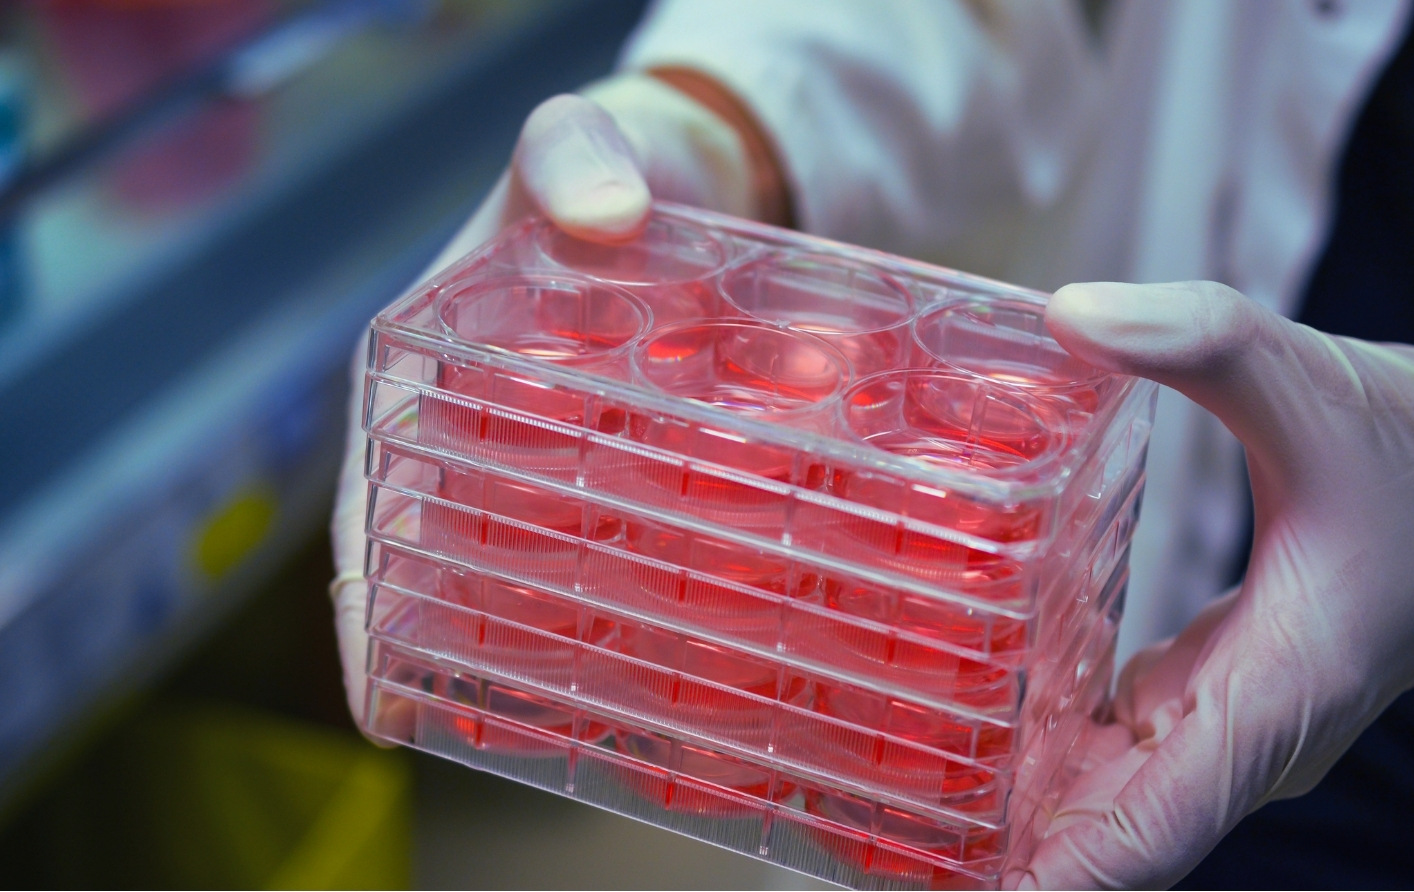 Lab technician carrying cell culture plates used in a host cell feasibility study